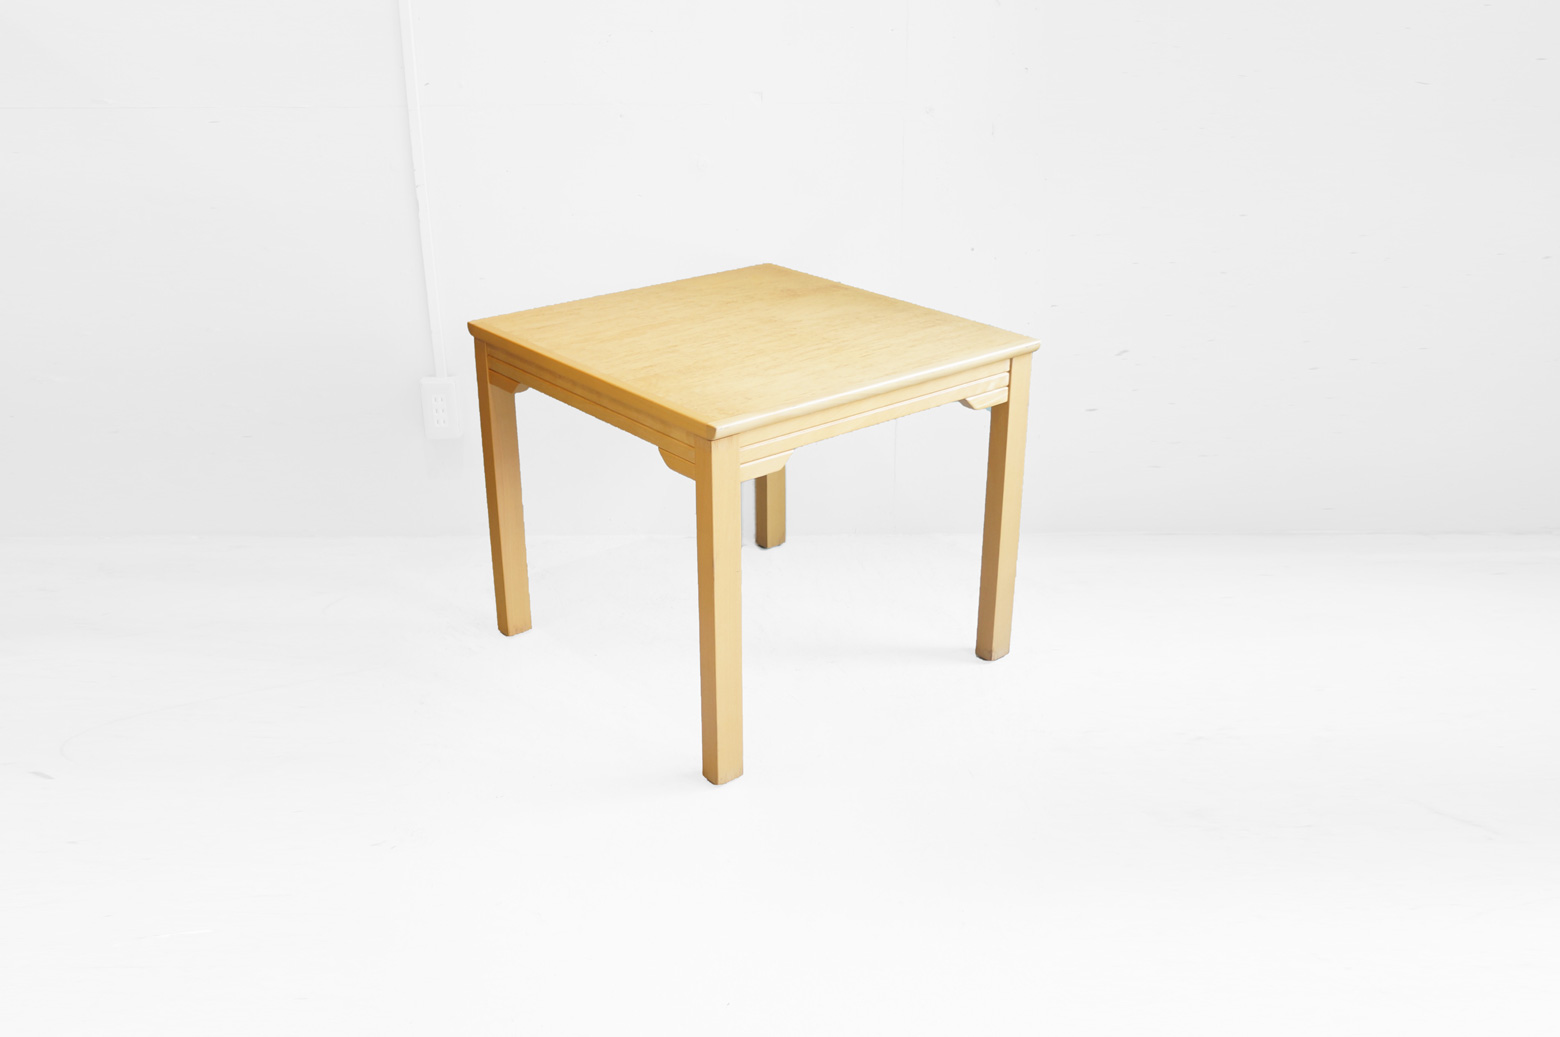 Albin i Hyssna ab Sofa Table made in Sweden/ソファテーブル スウェーデン